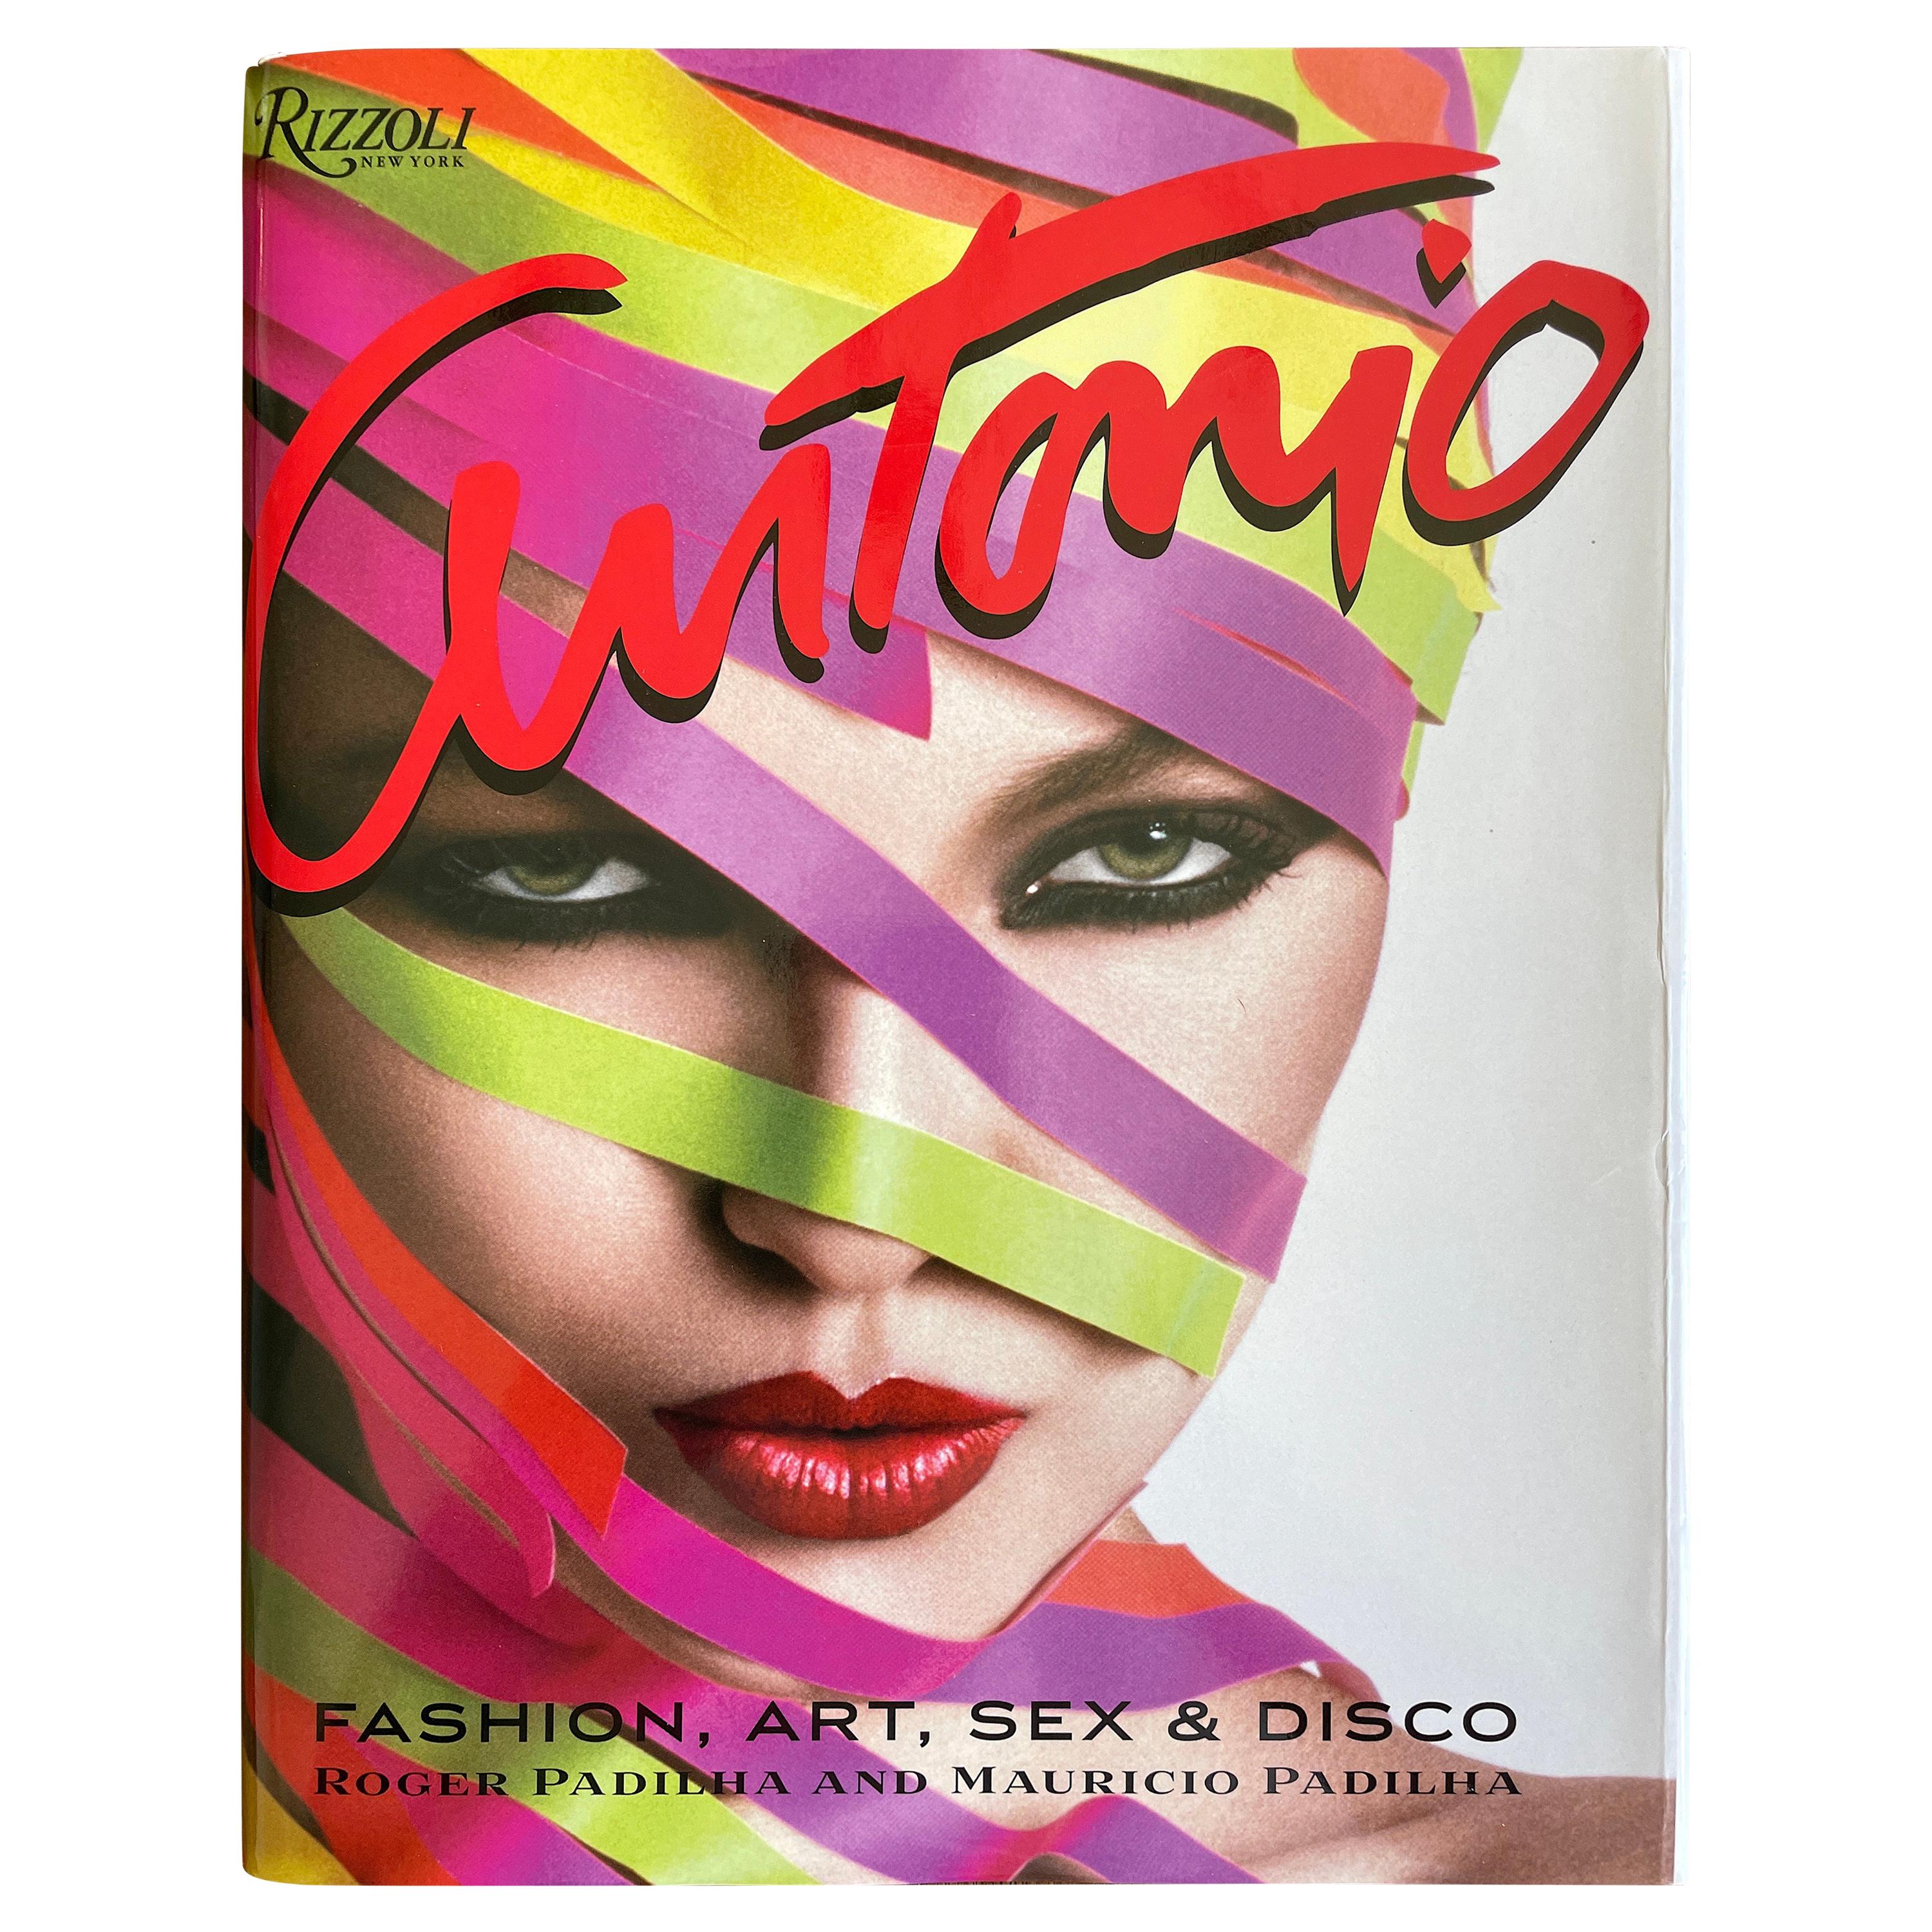 Antonio Fashion Art Sex and DIsco Rizzoli Out of Print Large Book For Sale